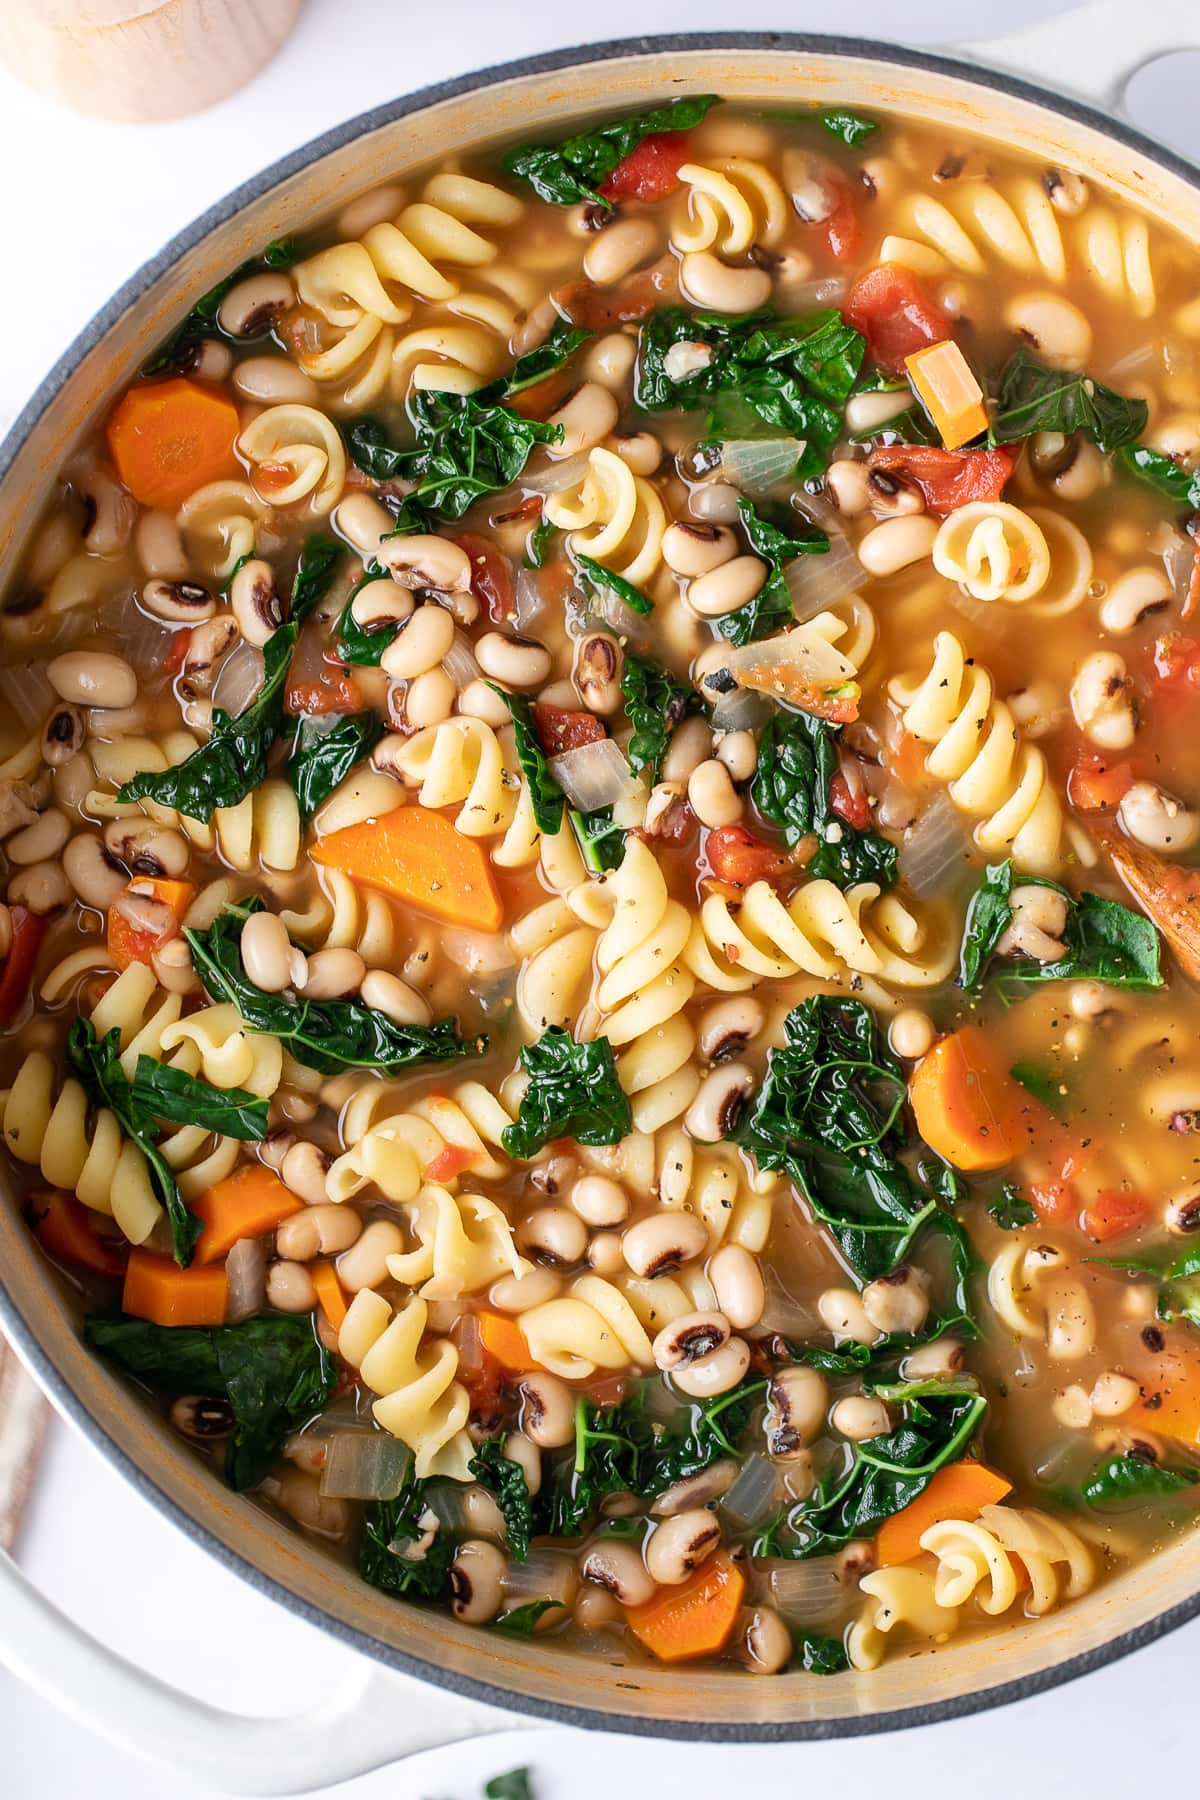 top down view of freshly made pot of pasta and bean soup with kale.